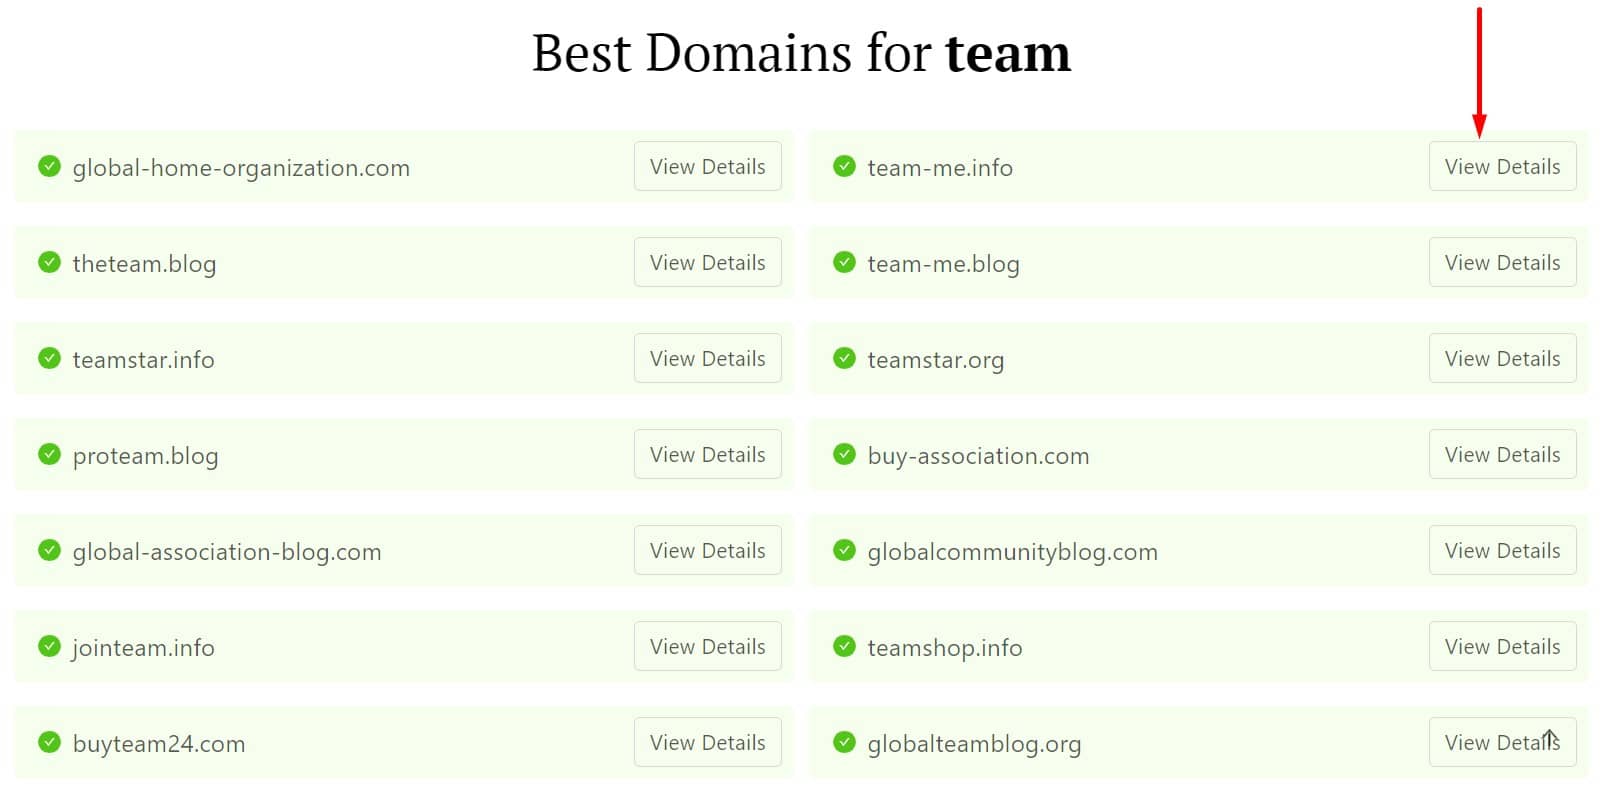 DomainWheel team name generator with a red arrow pointing to the "View Details" button for the top right suggestion